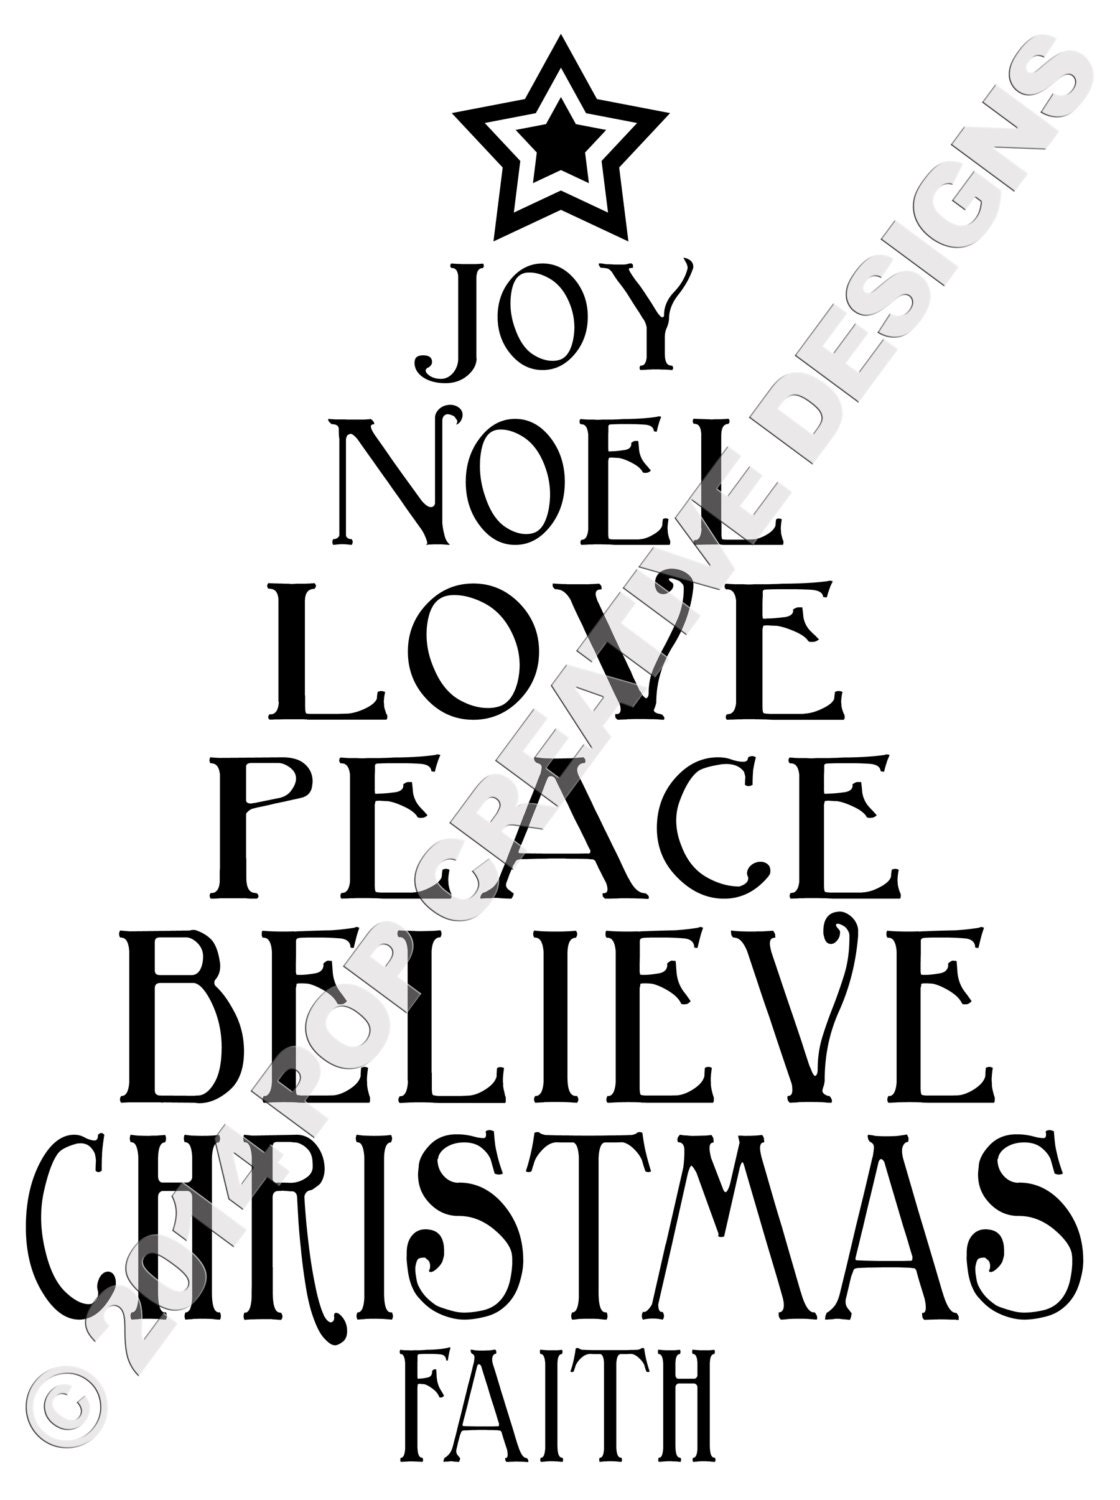 Christmas Tree Word Art SVG File by PopCreativeDesigns on Etsy